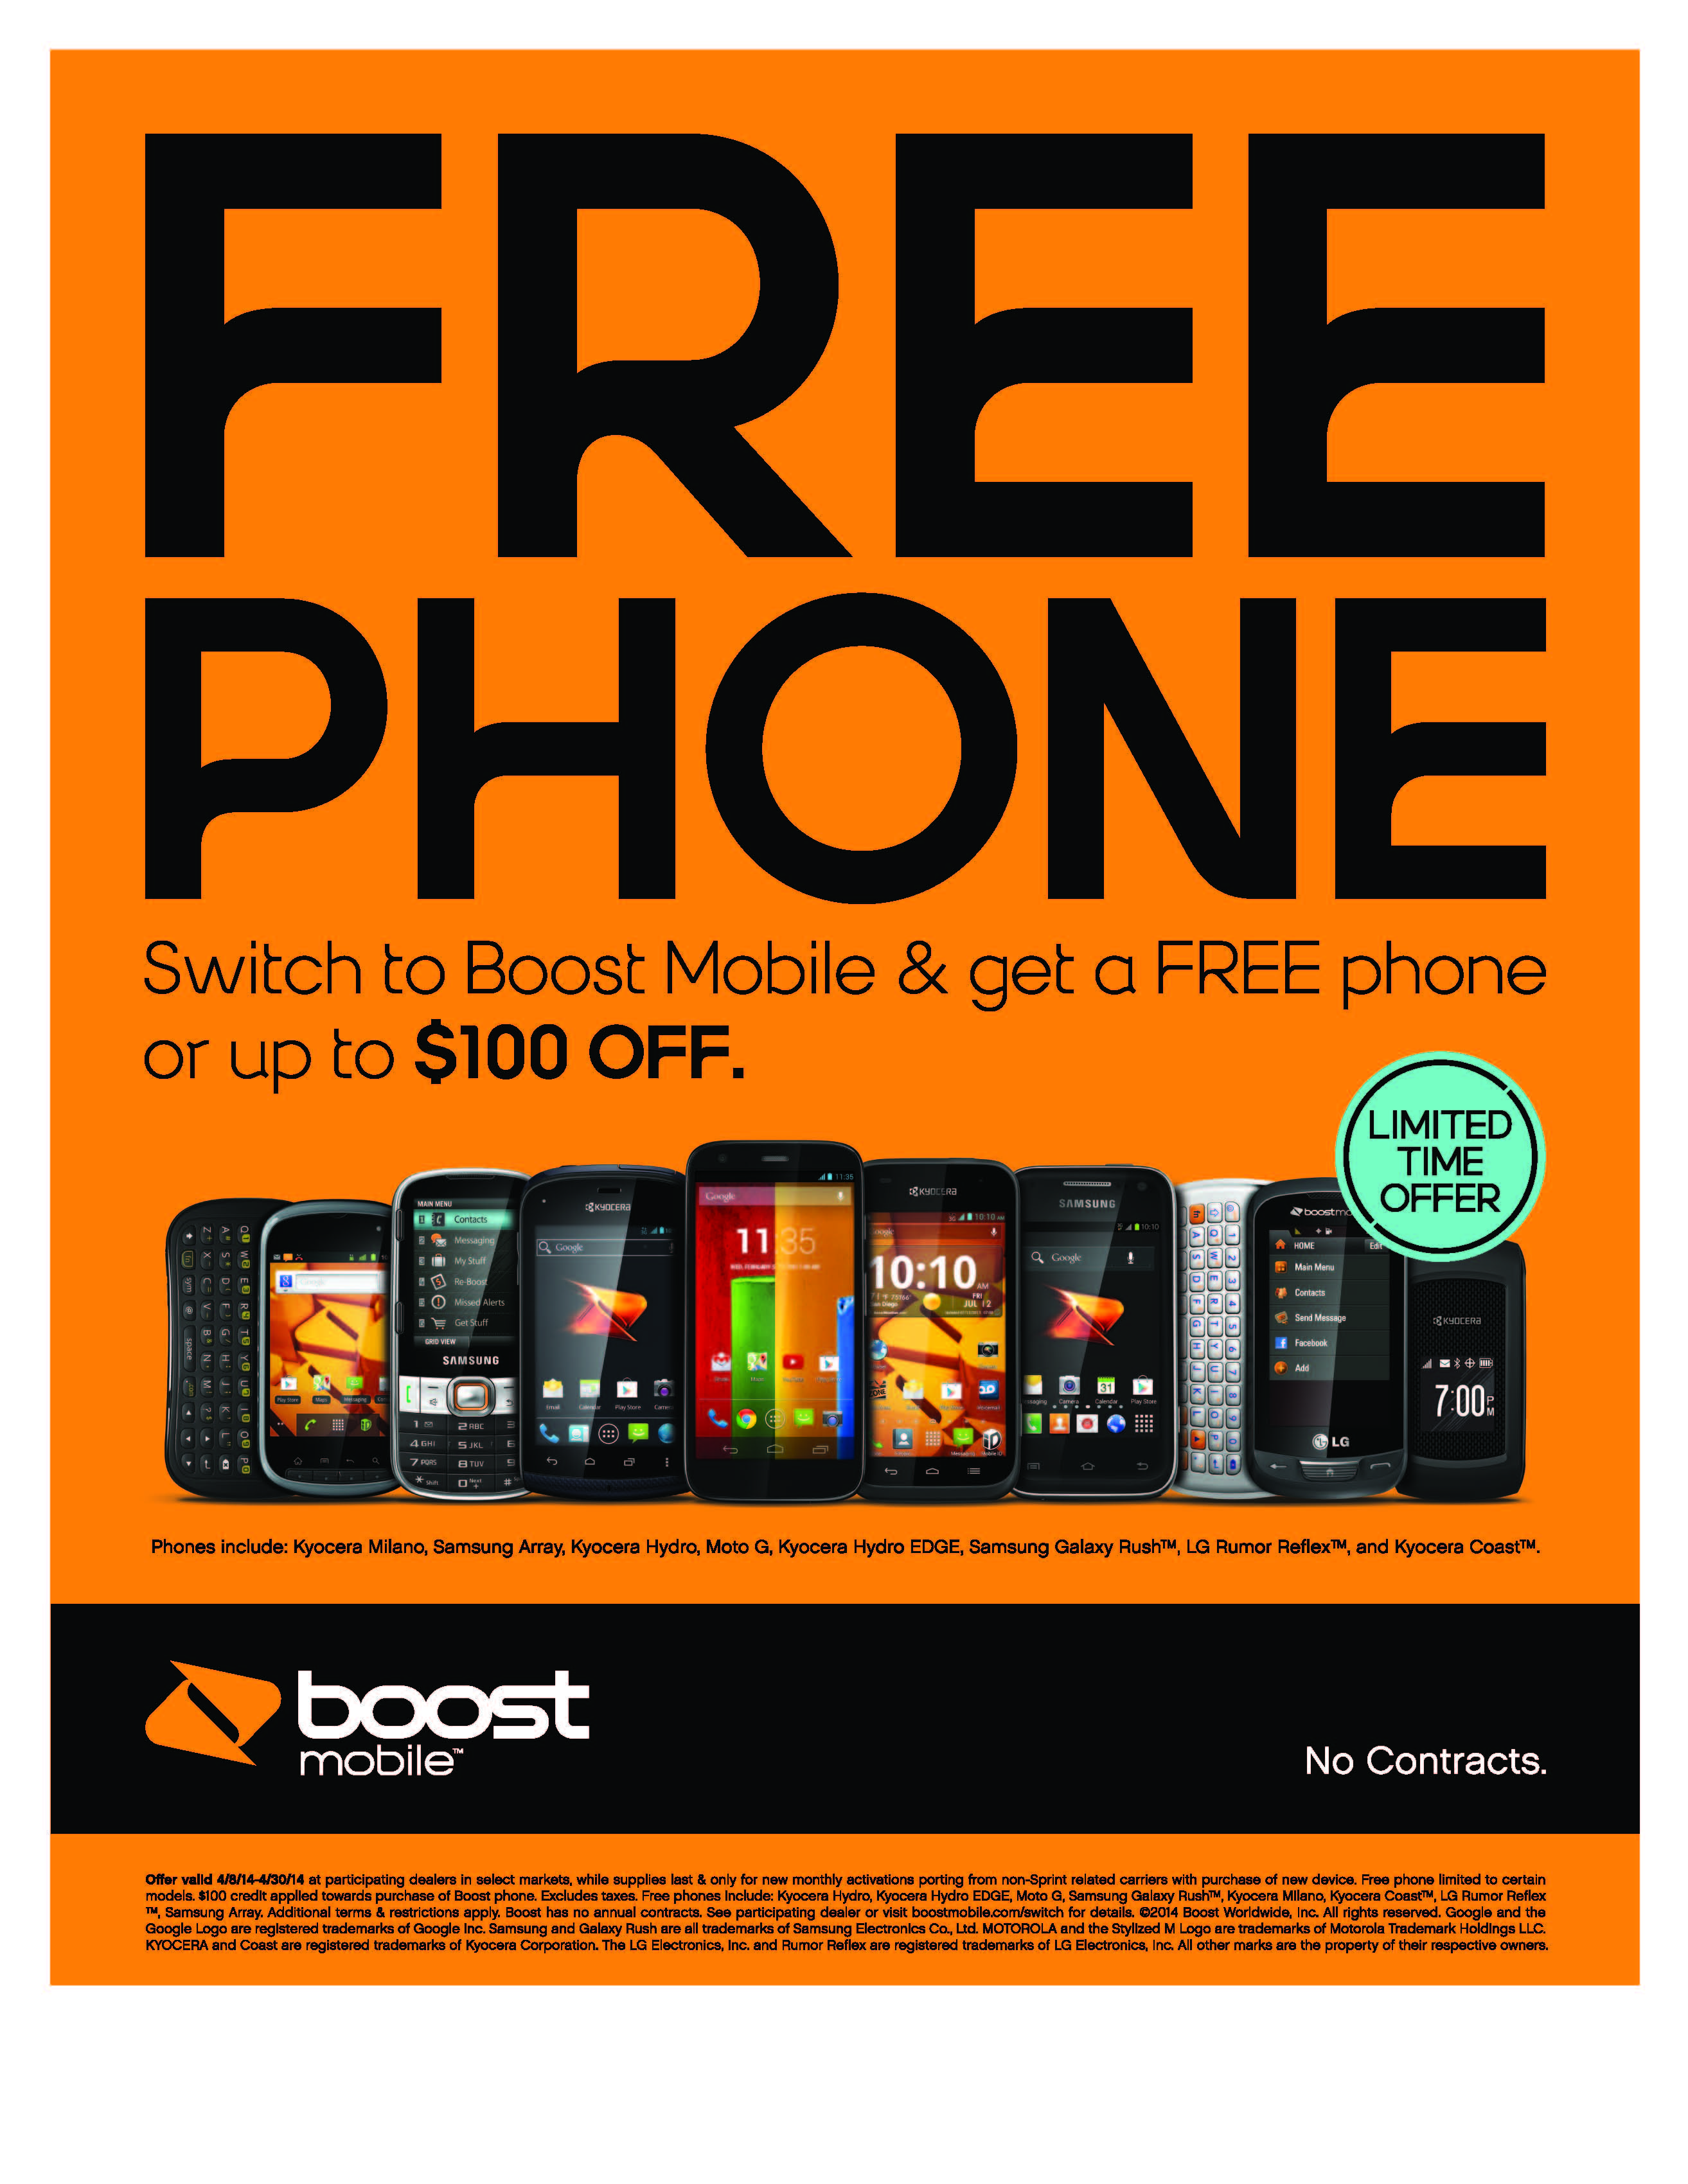 Switch to Boost Mobile & get a FREE phone or up to $100 OFF!